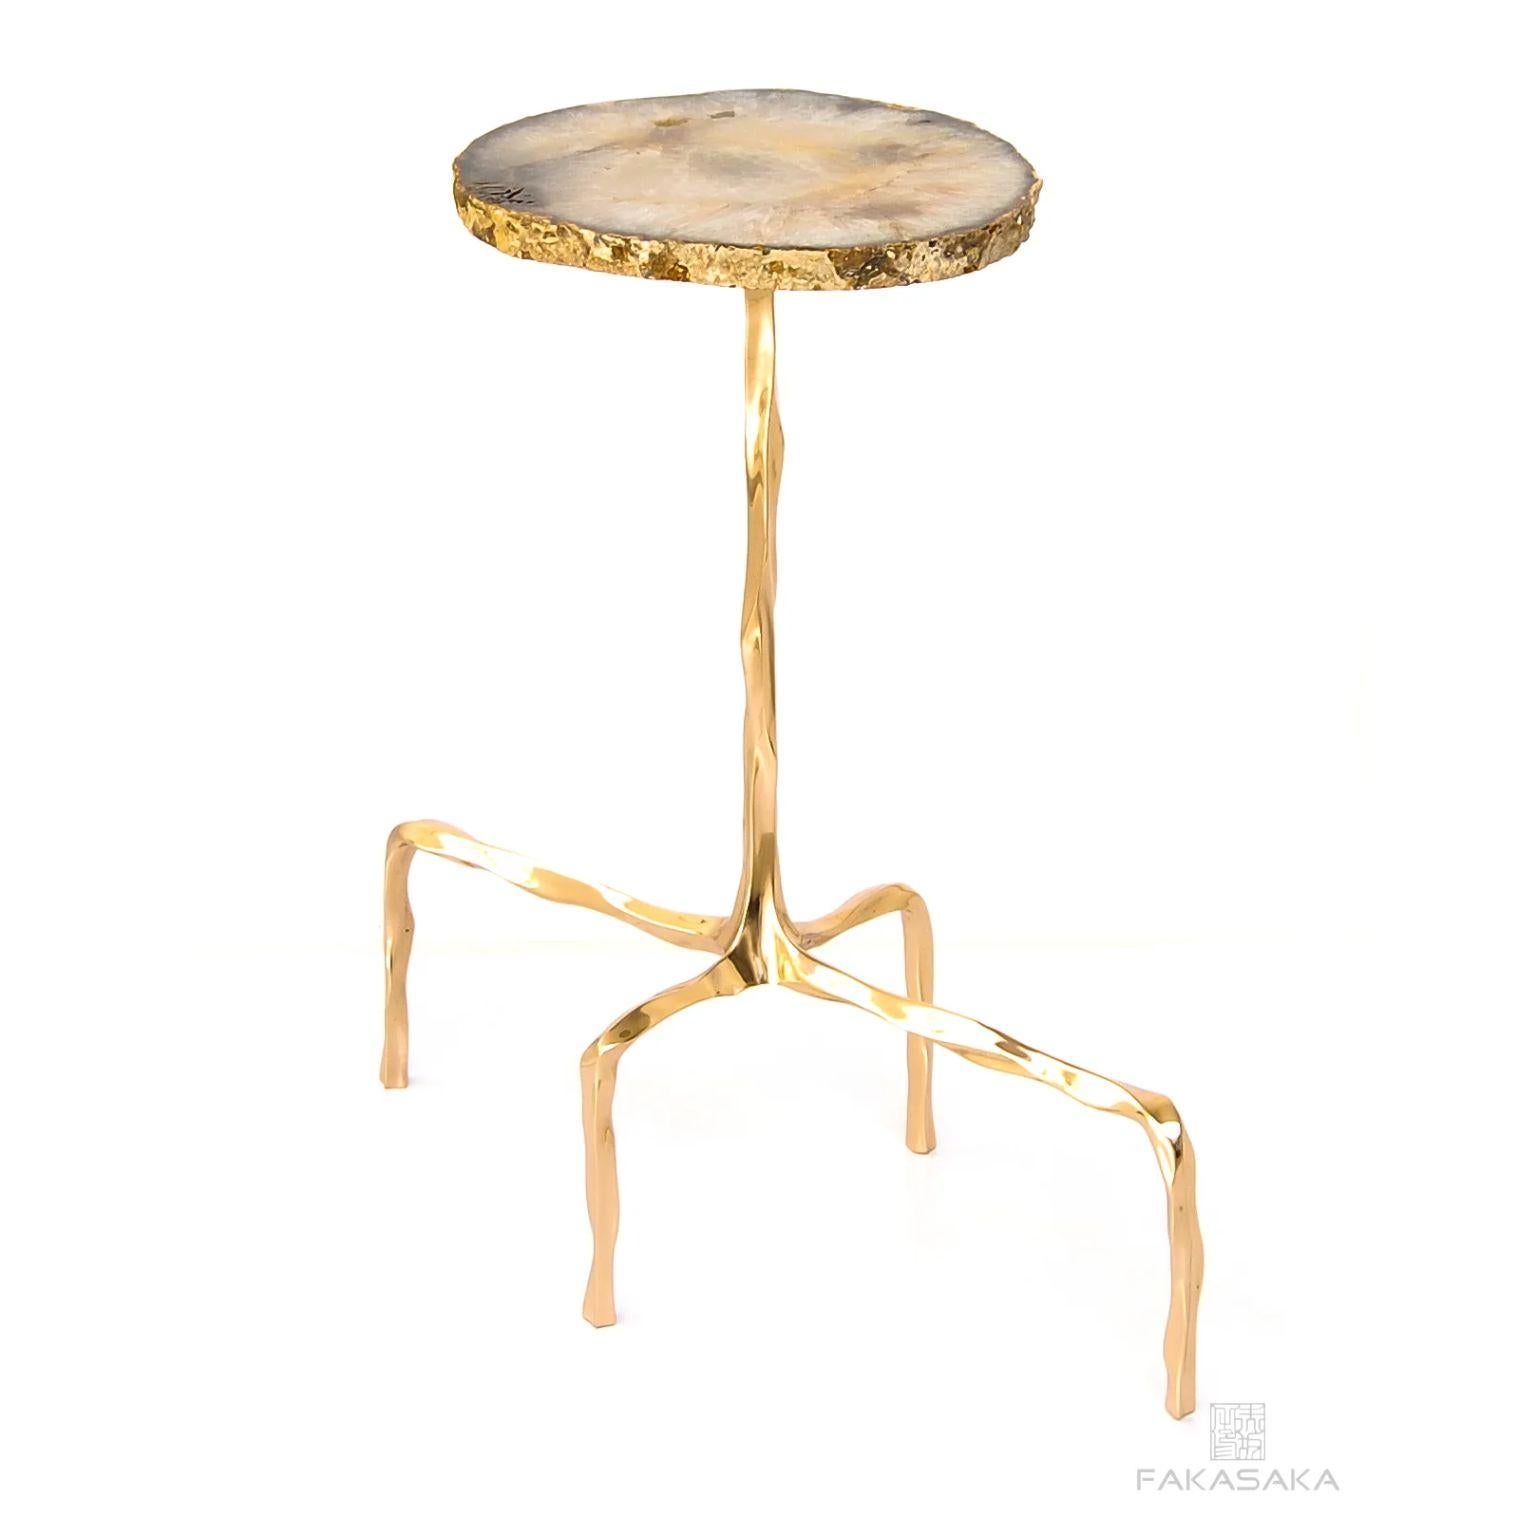 Brazilian Presley Drink Table with Agate Top by Fakasaka Design For Sale